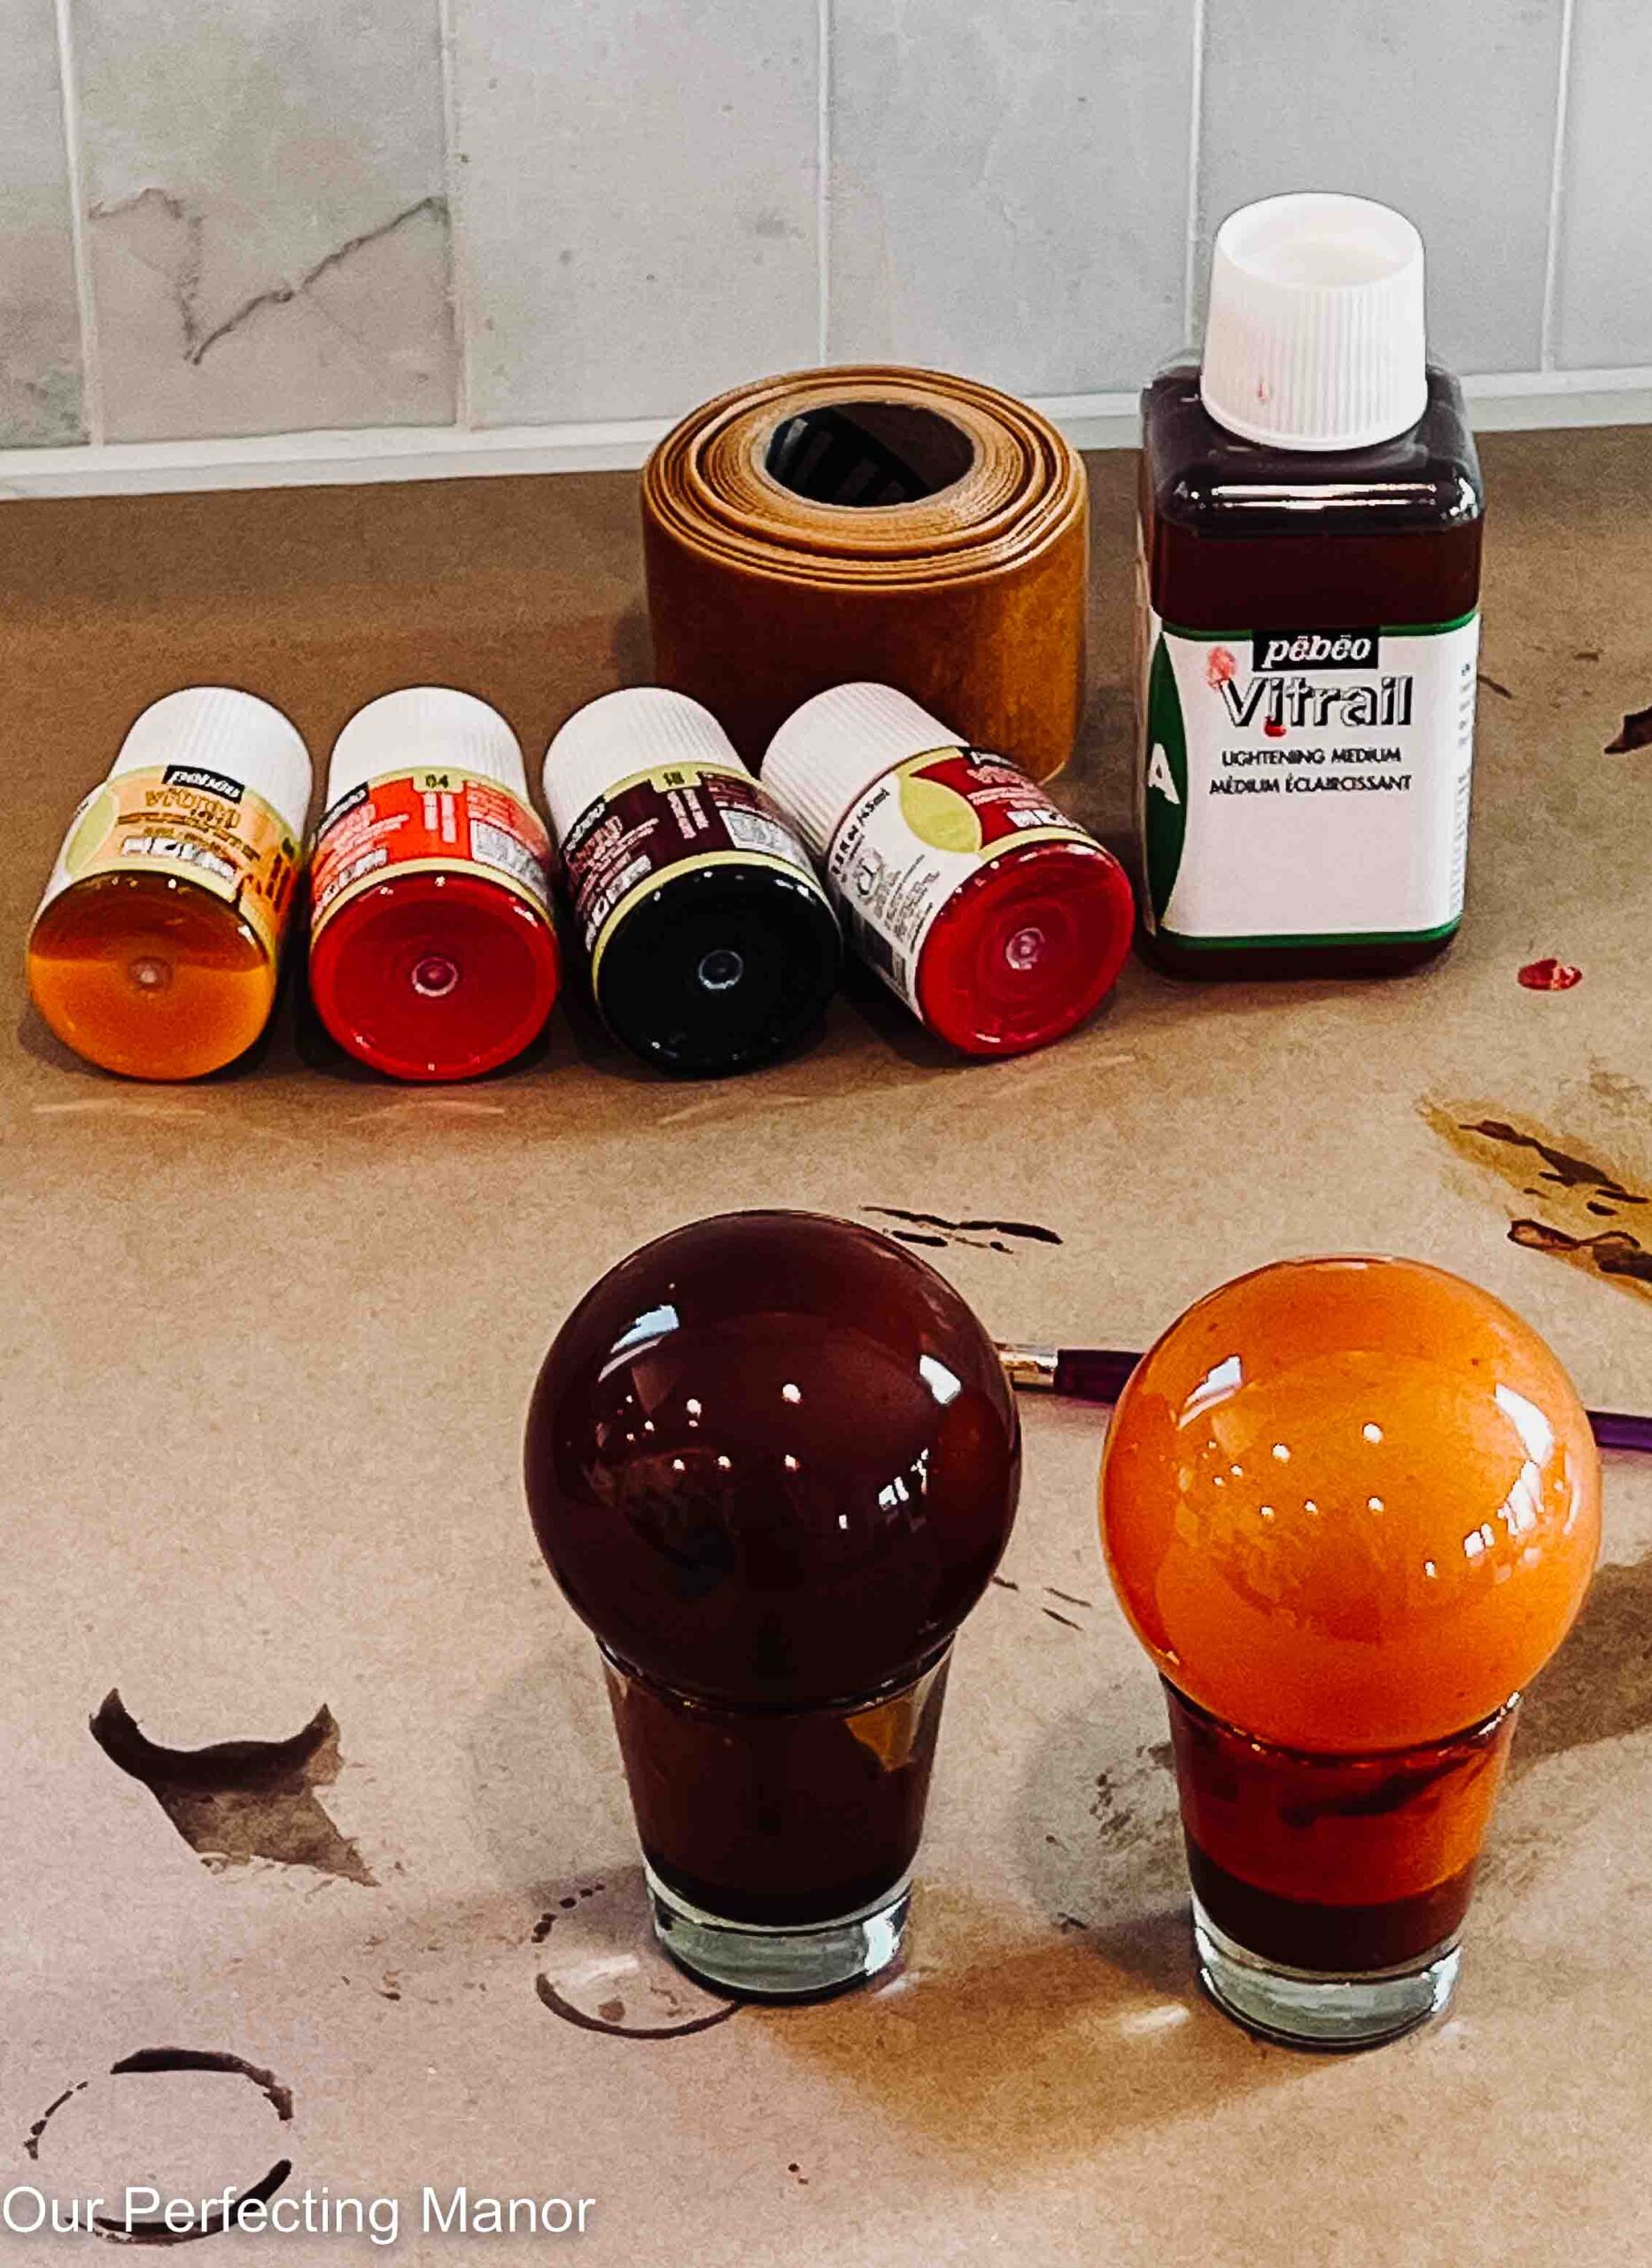 DiY Amber Glass Christmas Ornaments using glass paints